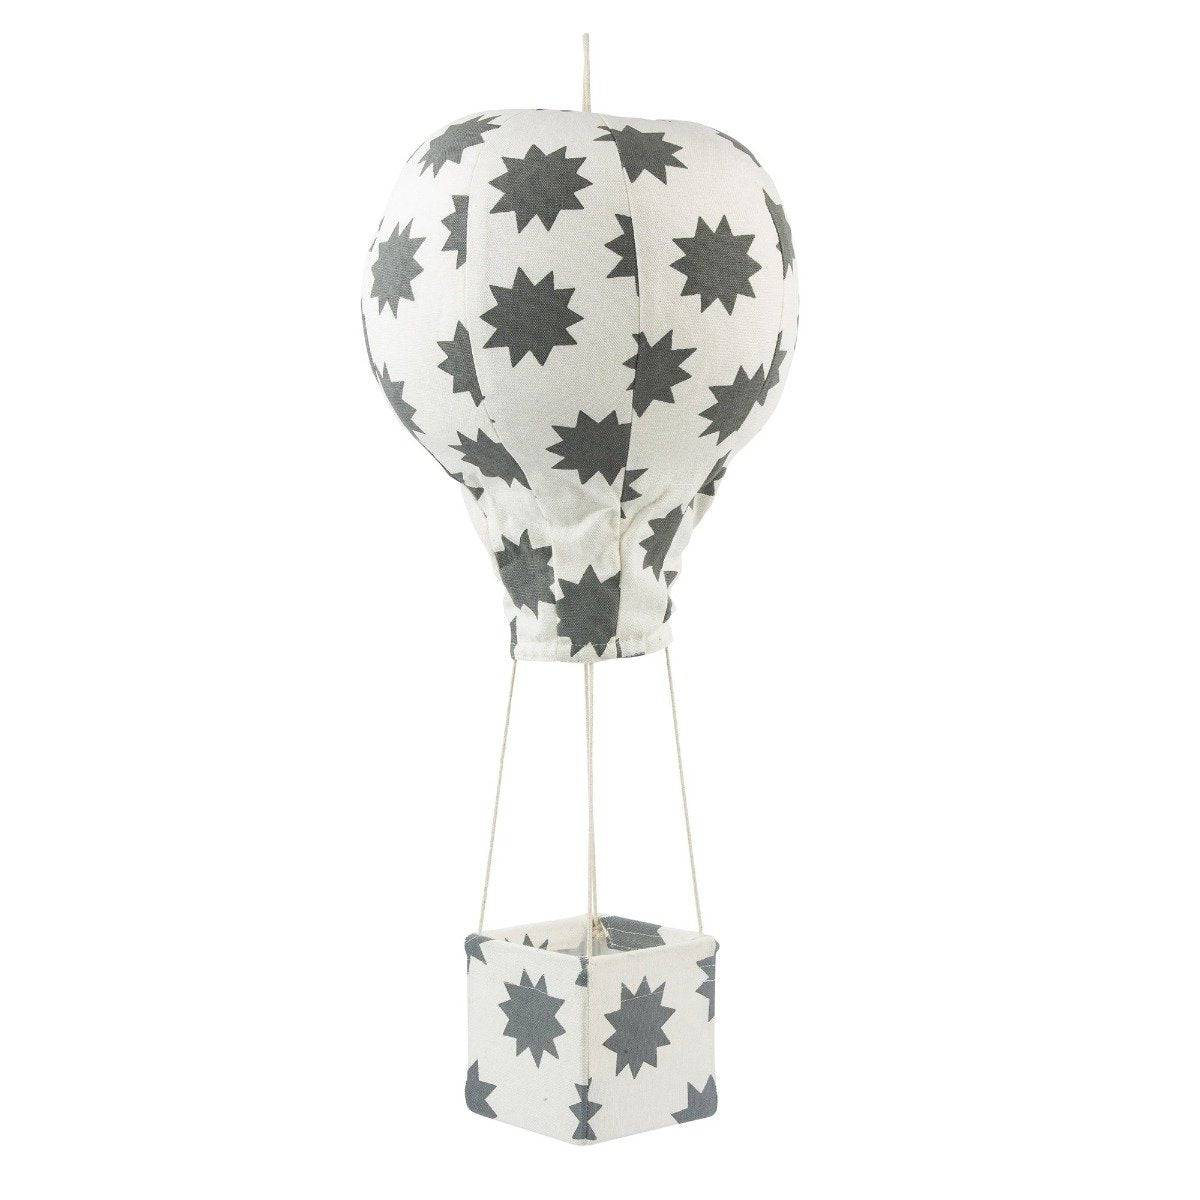 Pow! Charcoal Stars Hot Air Balloon - Twinkle Twinkle Little One